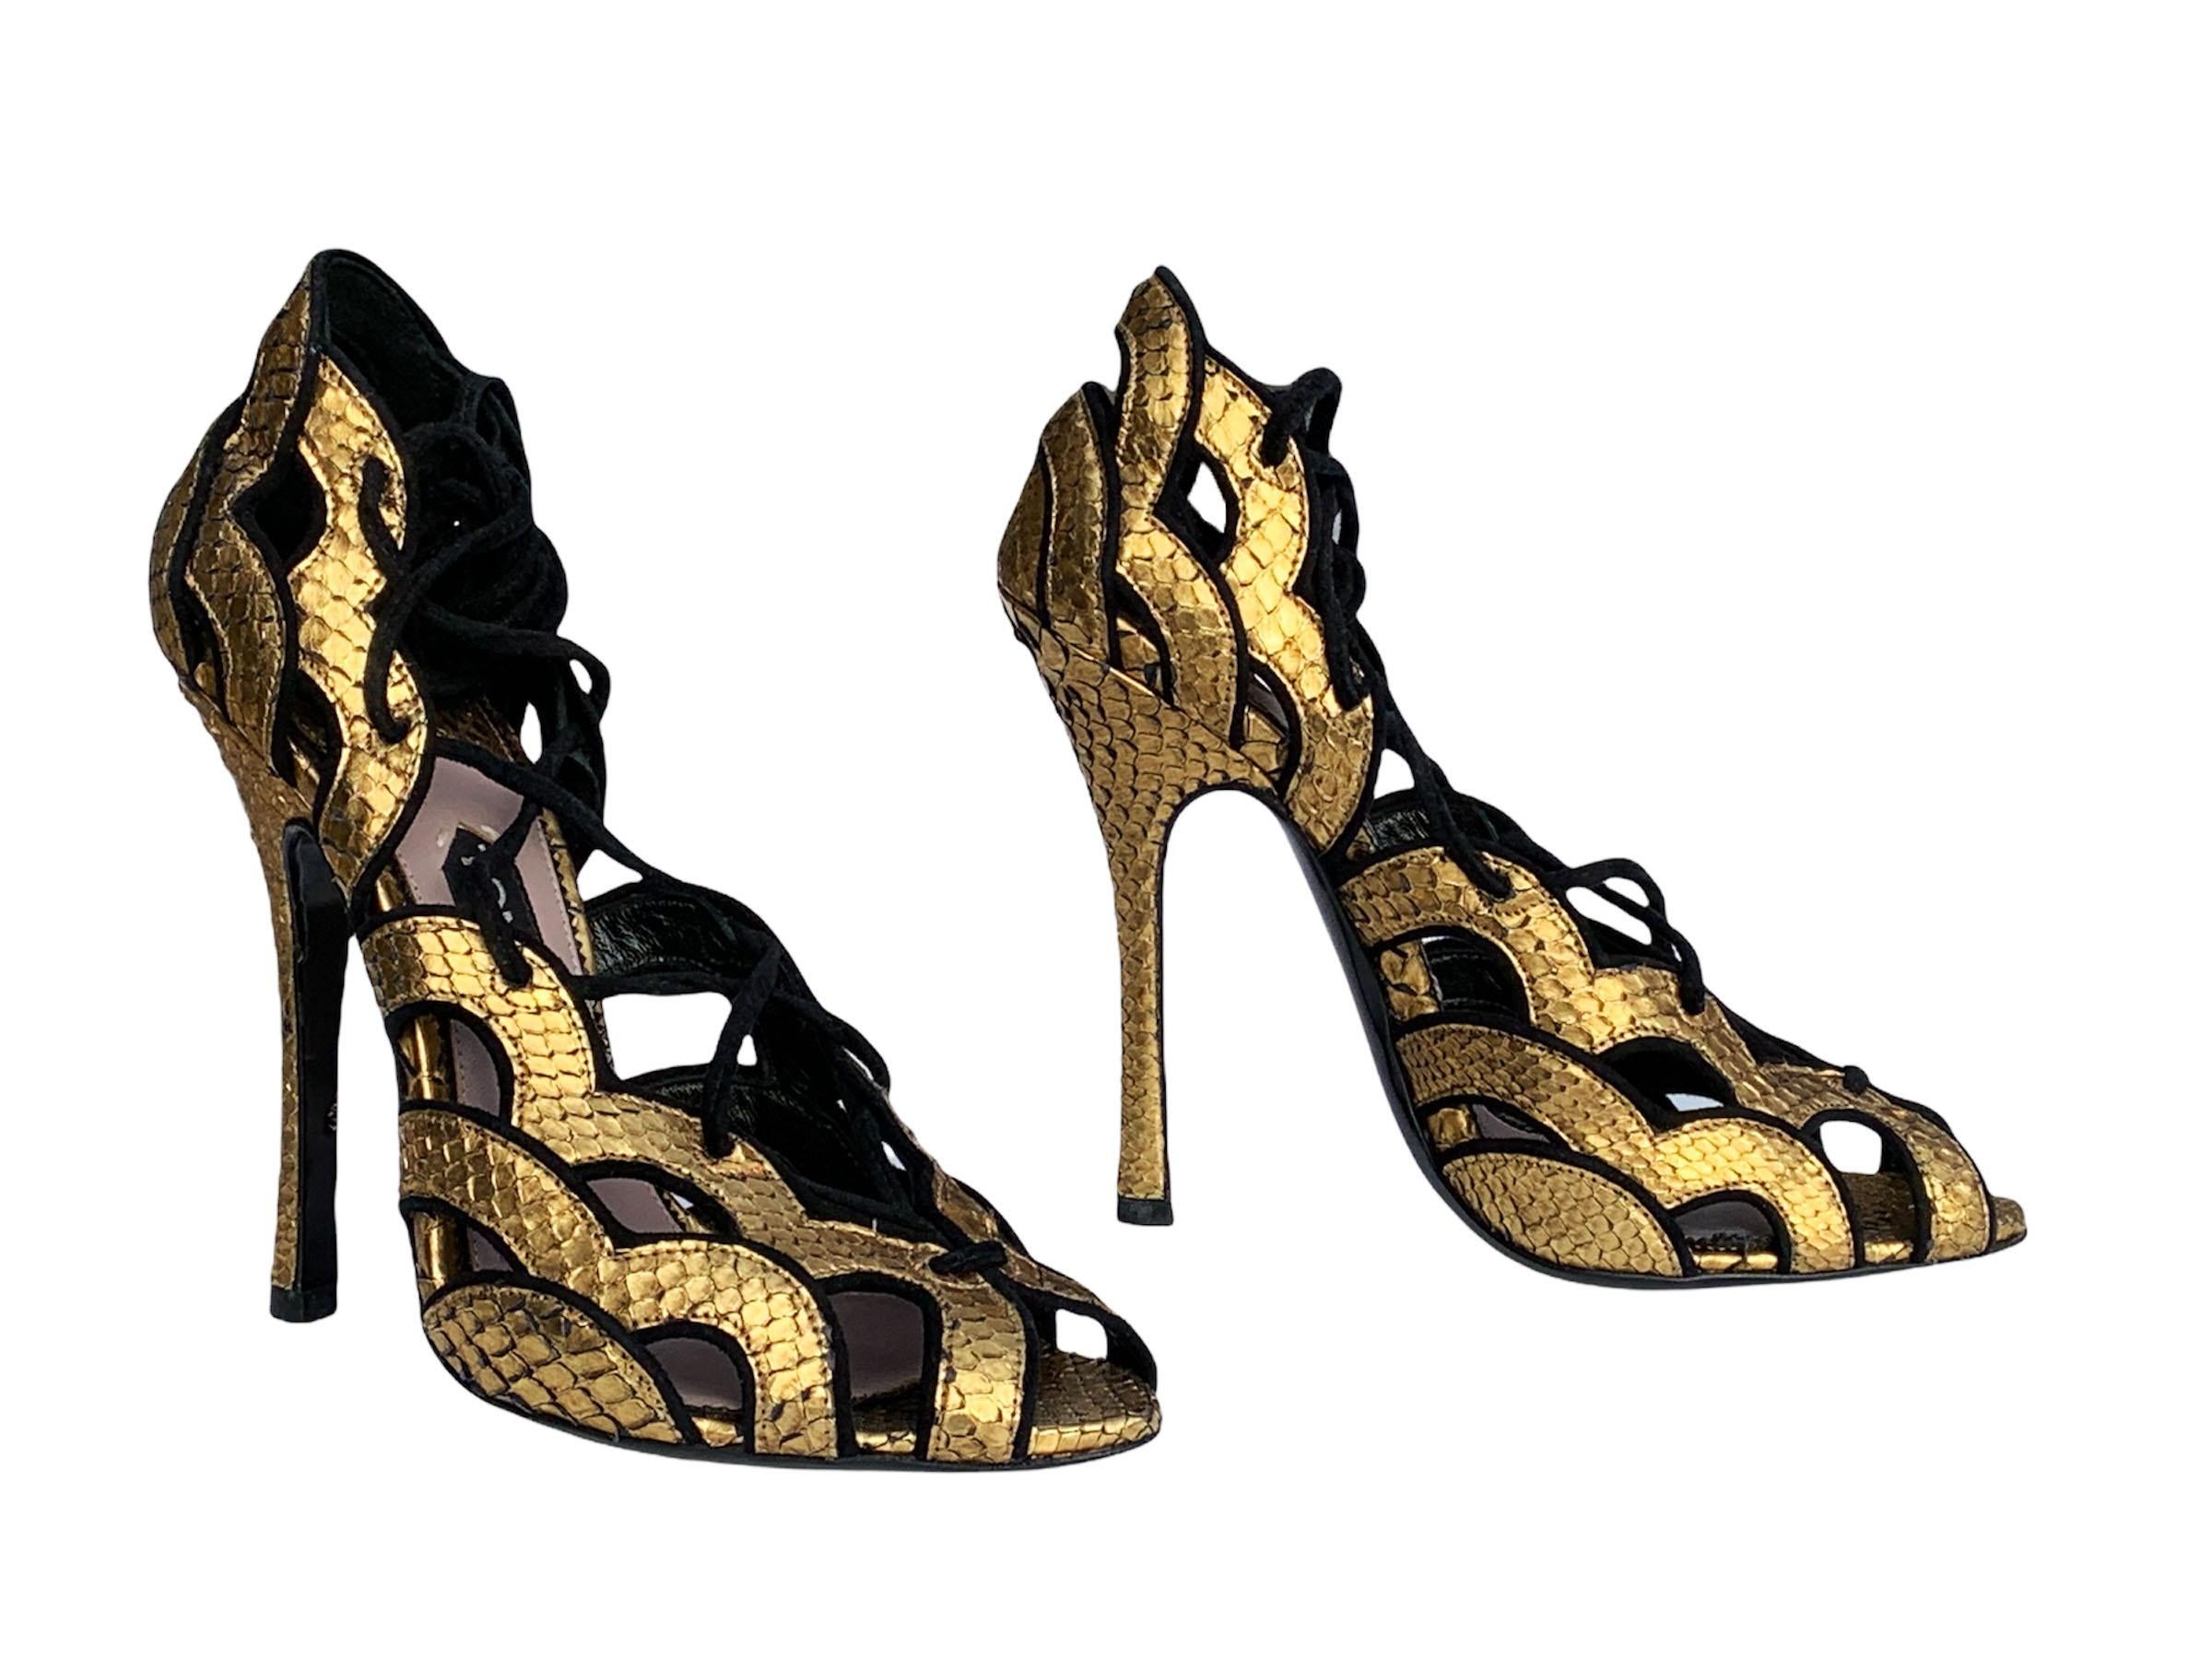 New Tom Ford Python Lace-Up Shoes Sandals
Designer size - 37 ( US 7 )
Cage-style sandals have been crafted in Italy from tactile metallic gold python. Set on a thin stiletto heel, this lace-up pair has leather ties that wrap securely around the